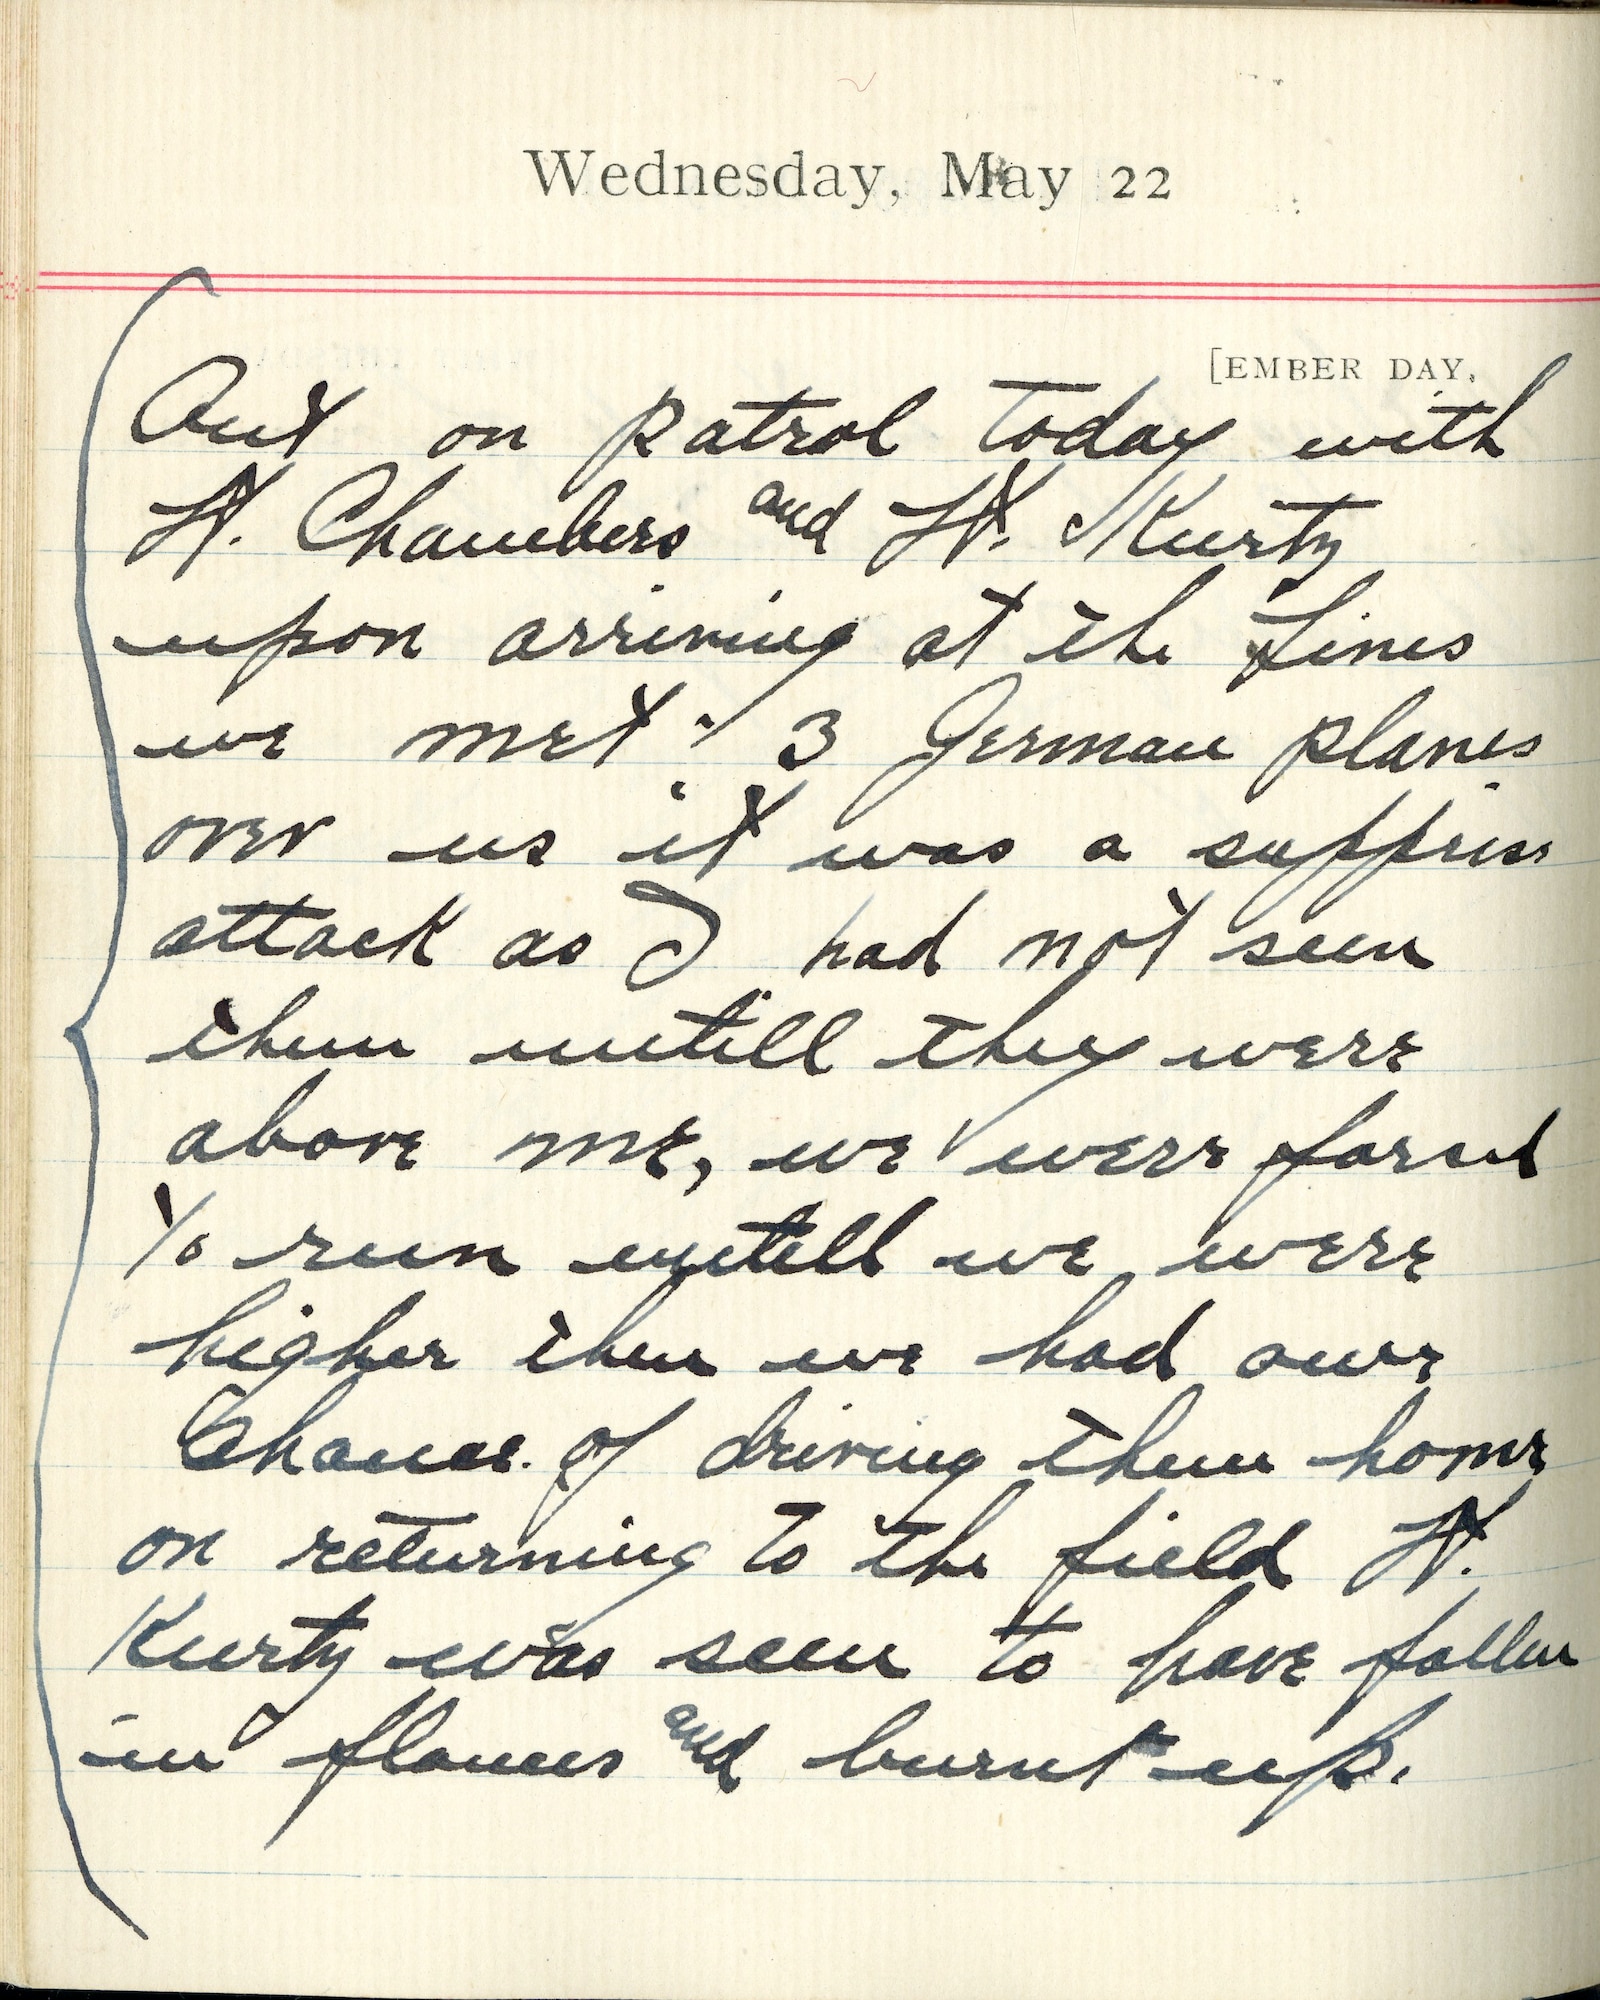 Capt. Edward V. Rickenbacker's 1918 wartime diary entry. (05/22/1918).

Out on patrol today with Lt. Chambers and Lt. [Paul B.] Kurtz.  Upon arriving at the lines we met 3 German planes over us.  It was a surprise attack as I had not seen them until they were above me.  We were forced to run until we were higher – then we had our chance of driving them home.  On returning to the field, Lt. Kurtz was seen to have fallen in flames and burnt up.